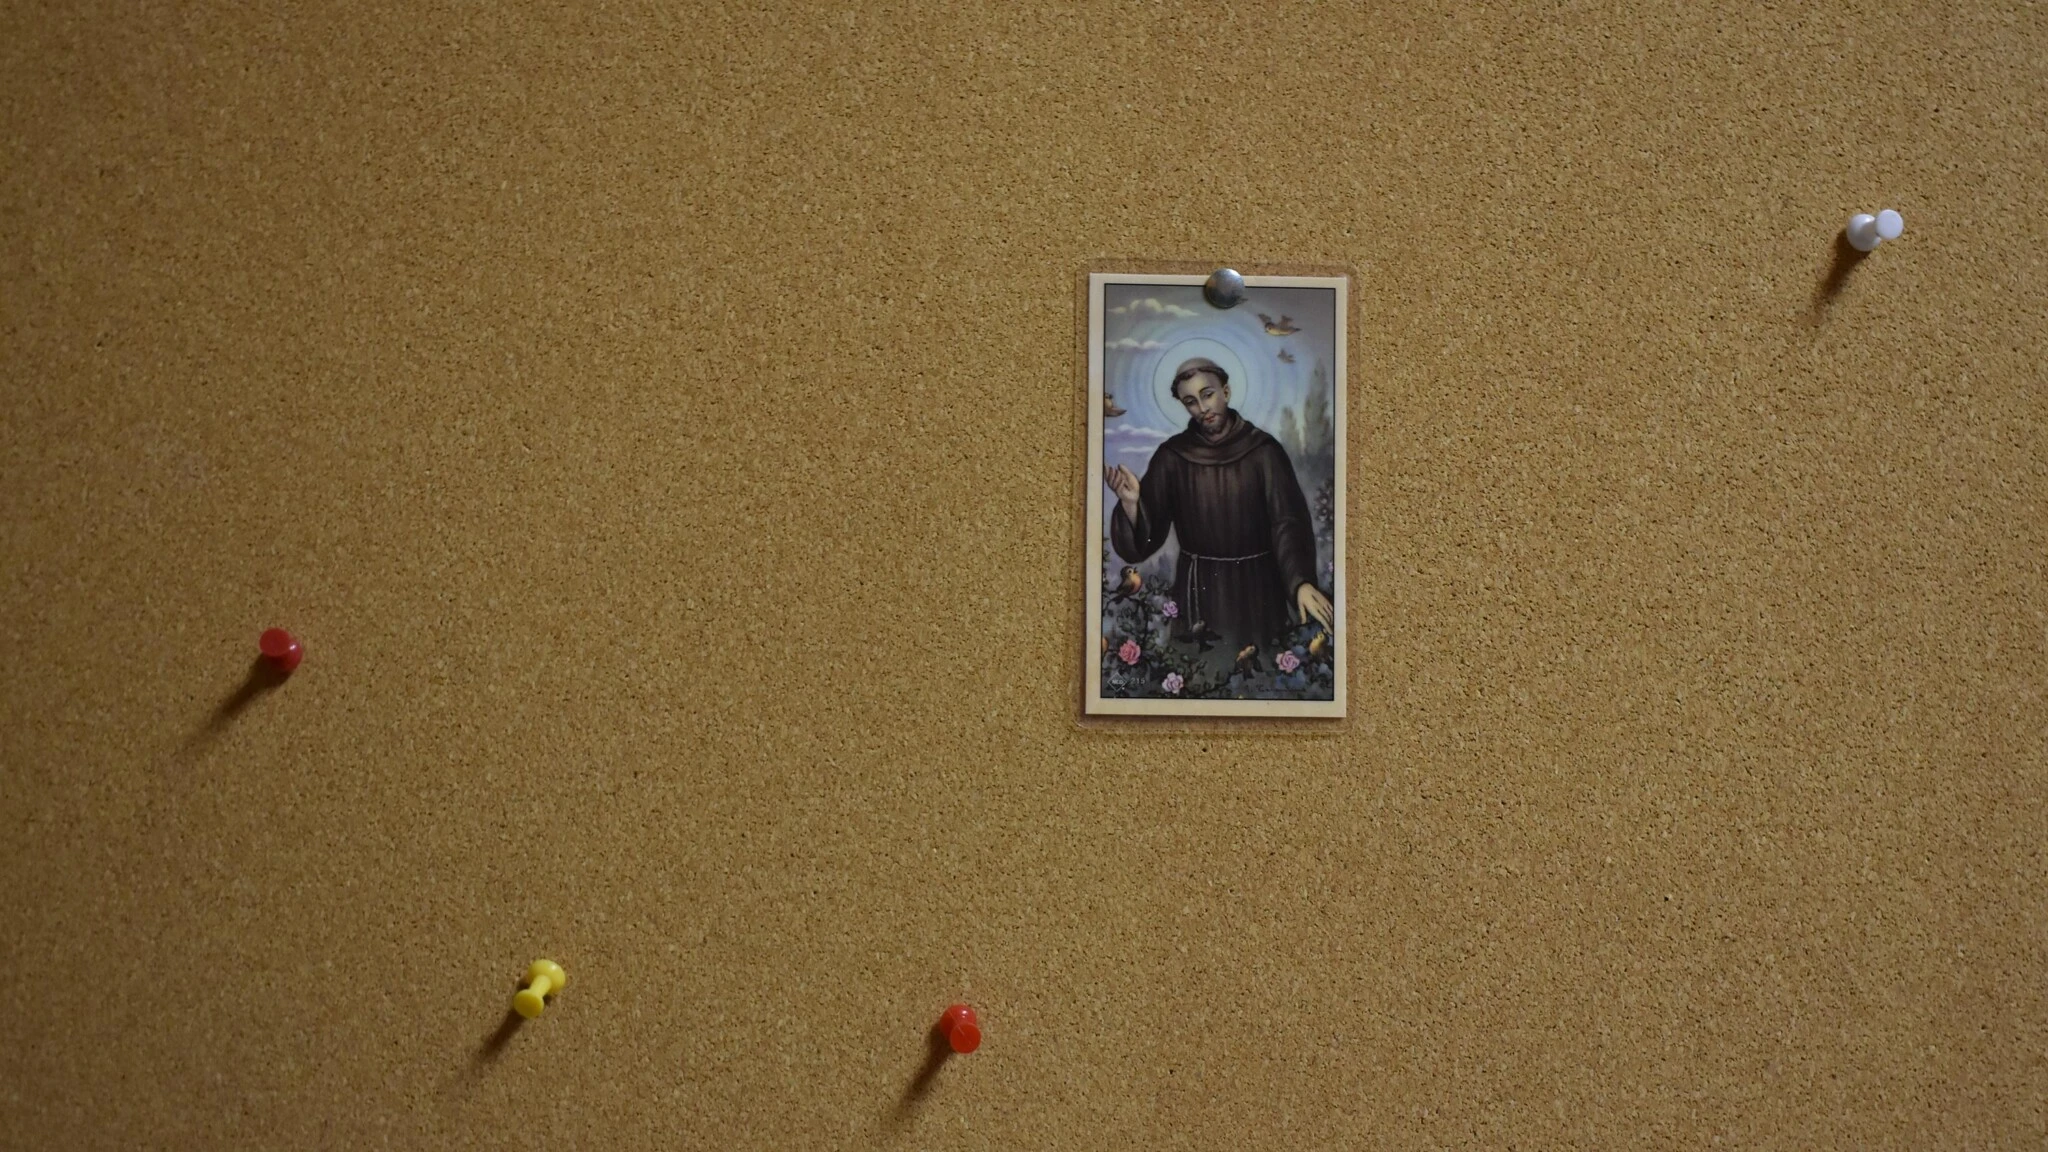 a prayer card pinned on an otherwise empty bulletin board